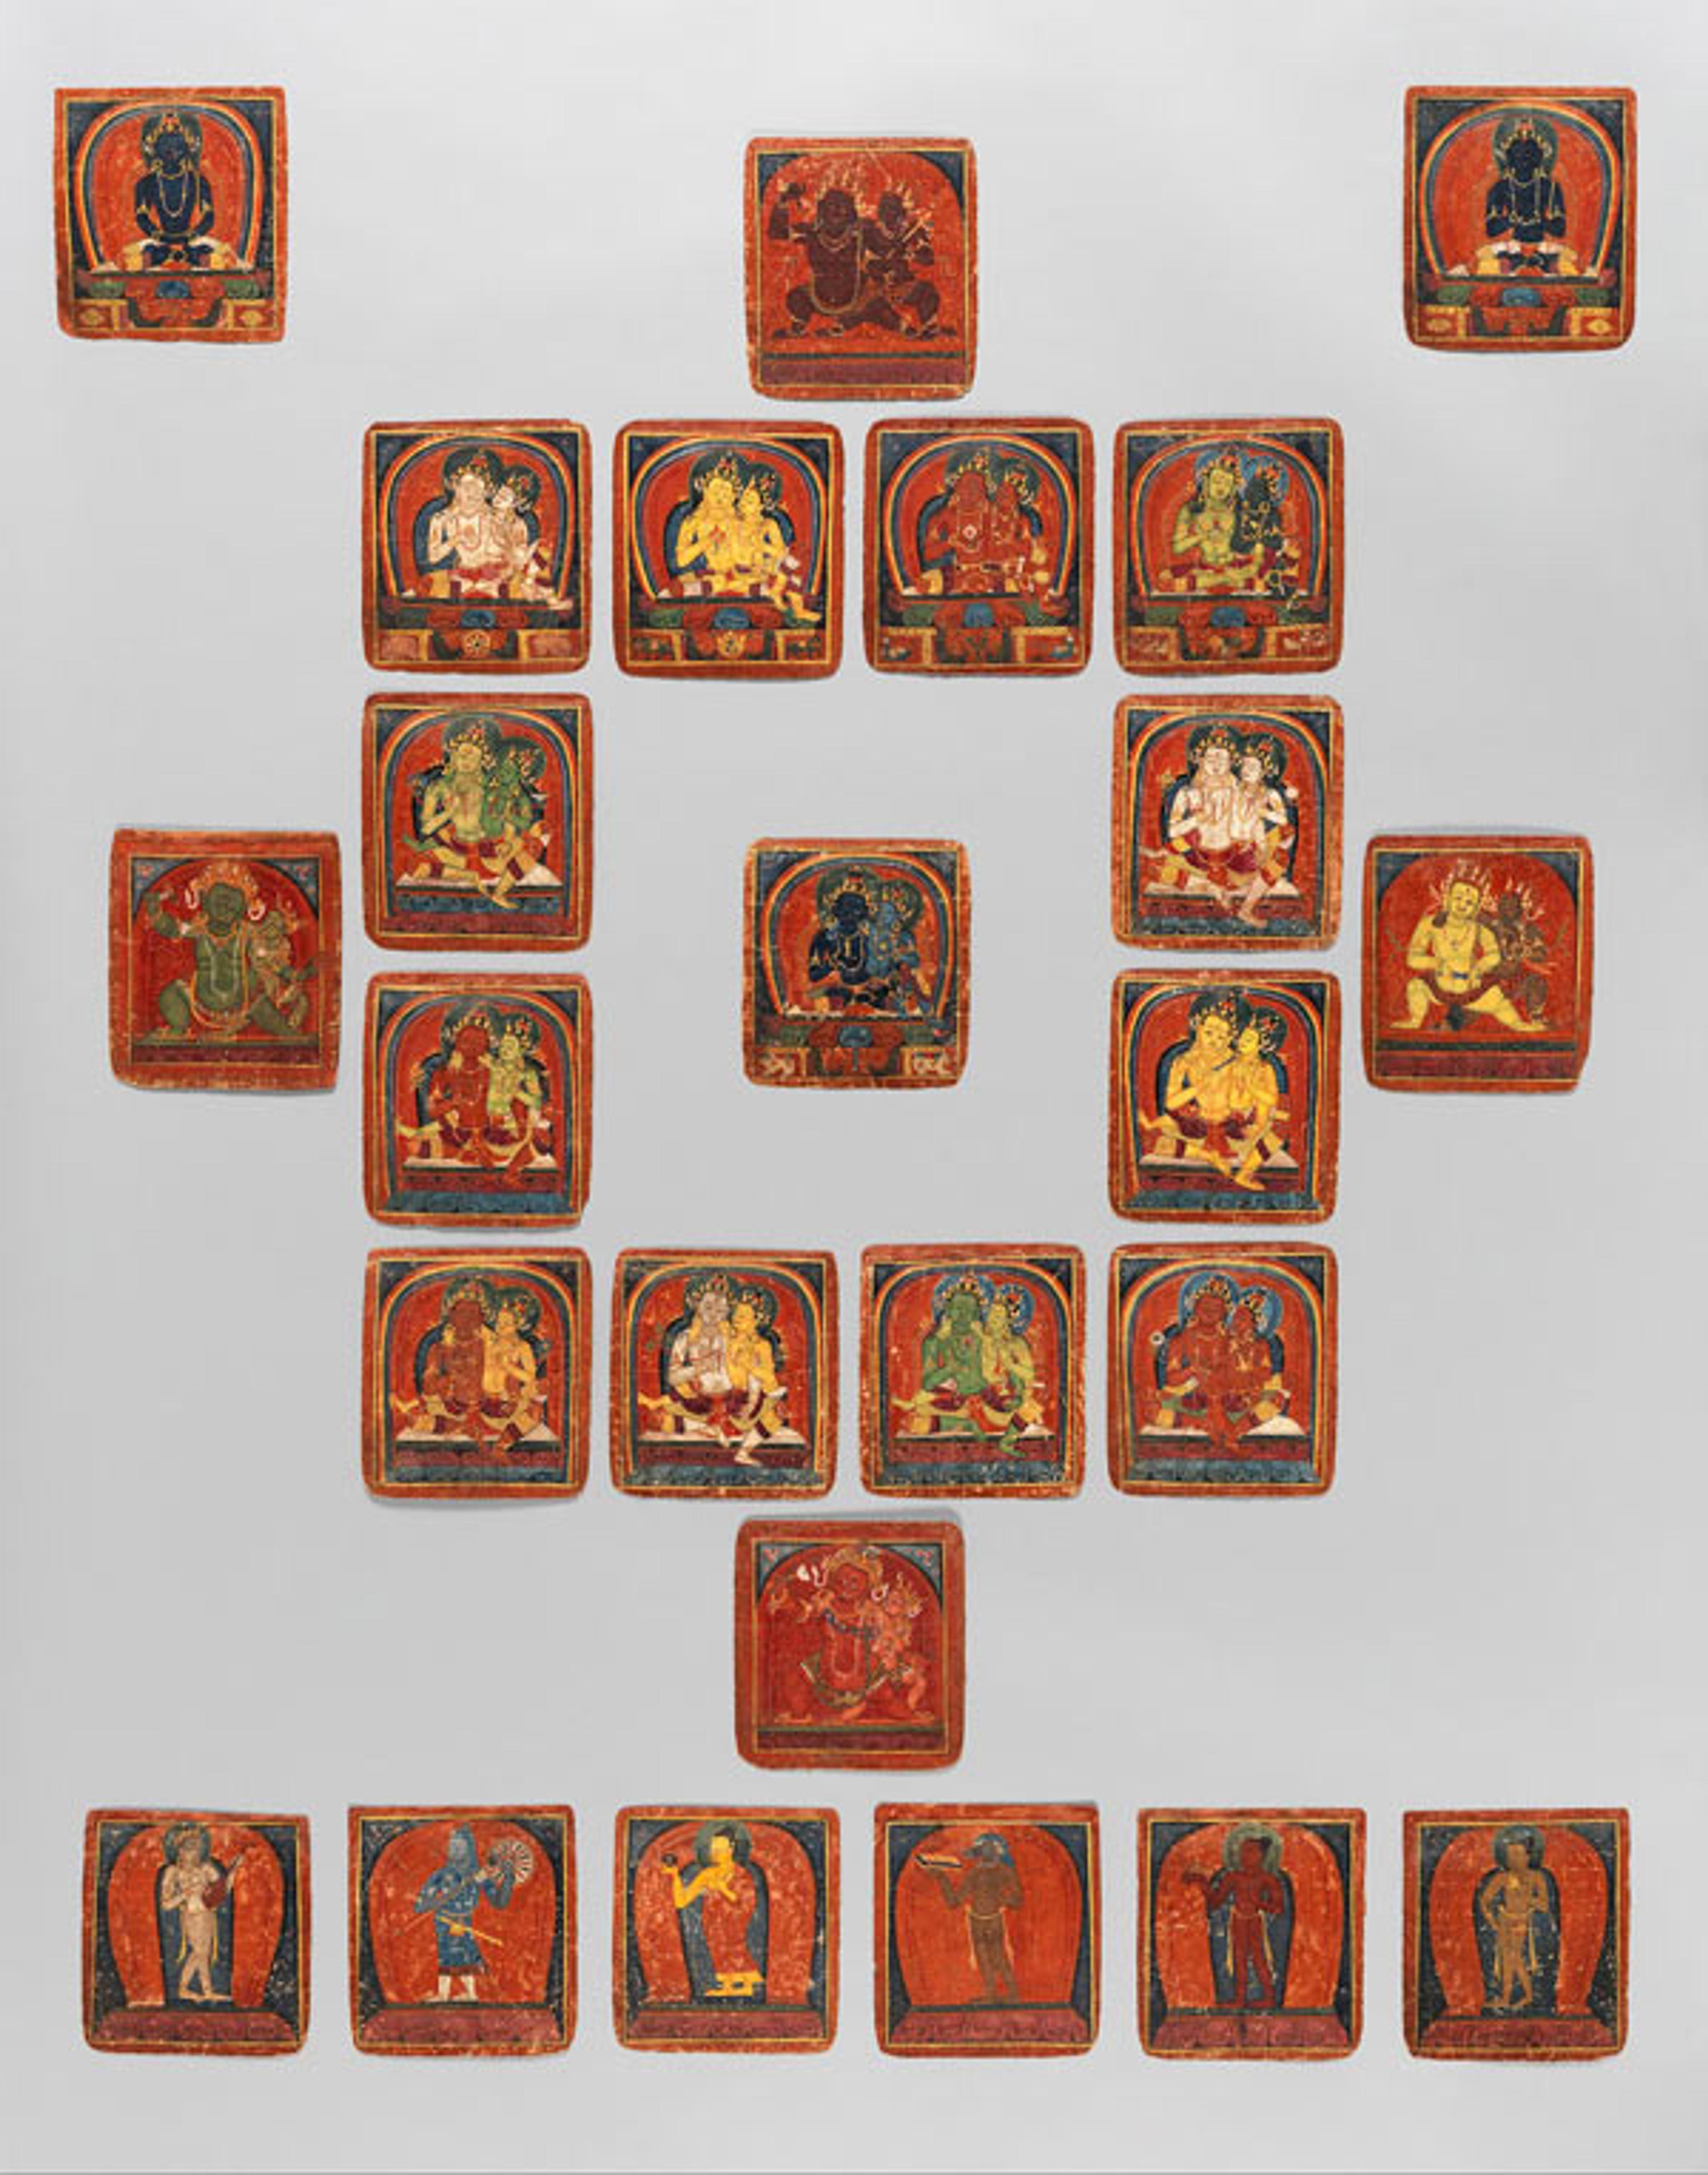 Initiation Cards (Tsakalis), early 15th century. Tibet. Opaque watercolor on paper; Each 6 1/4 x 5 3/4 in. (16 x 14.5 cm). The Metropolitan Museum of Art, New York, Rogers Fund, 2000 (2000.282.1–.25)